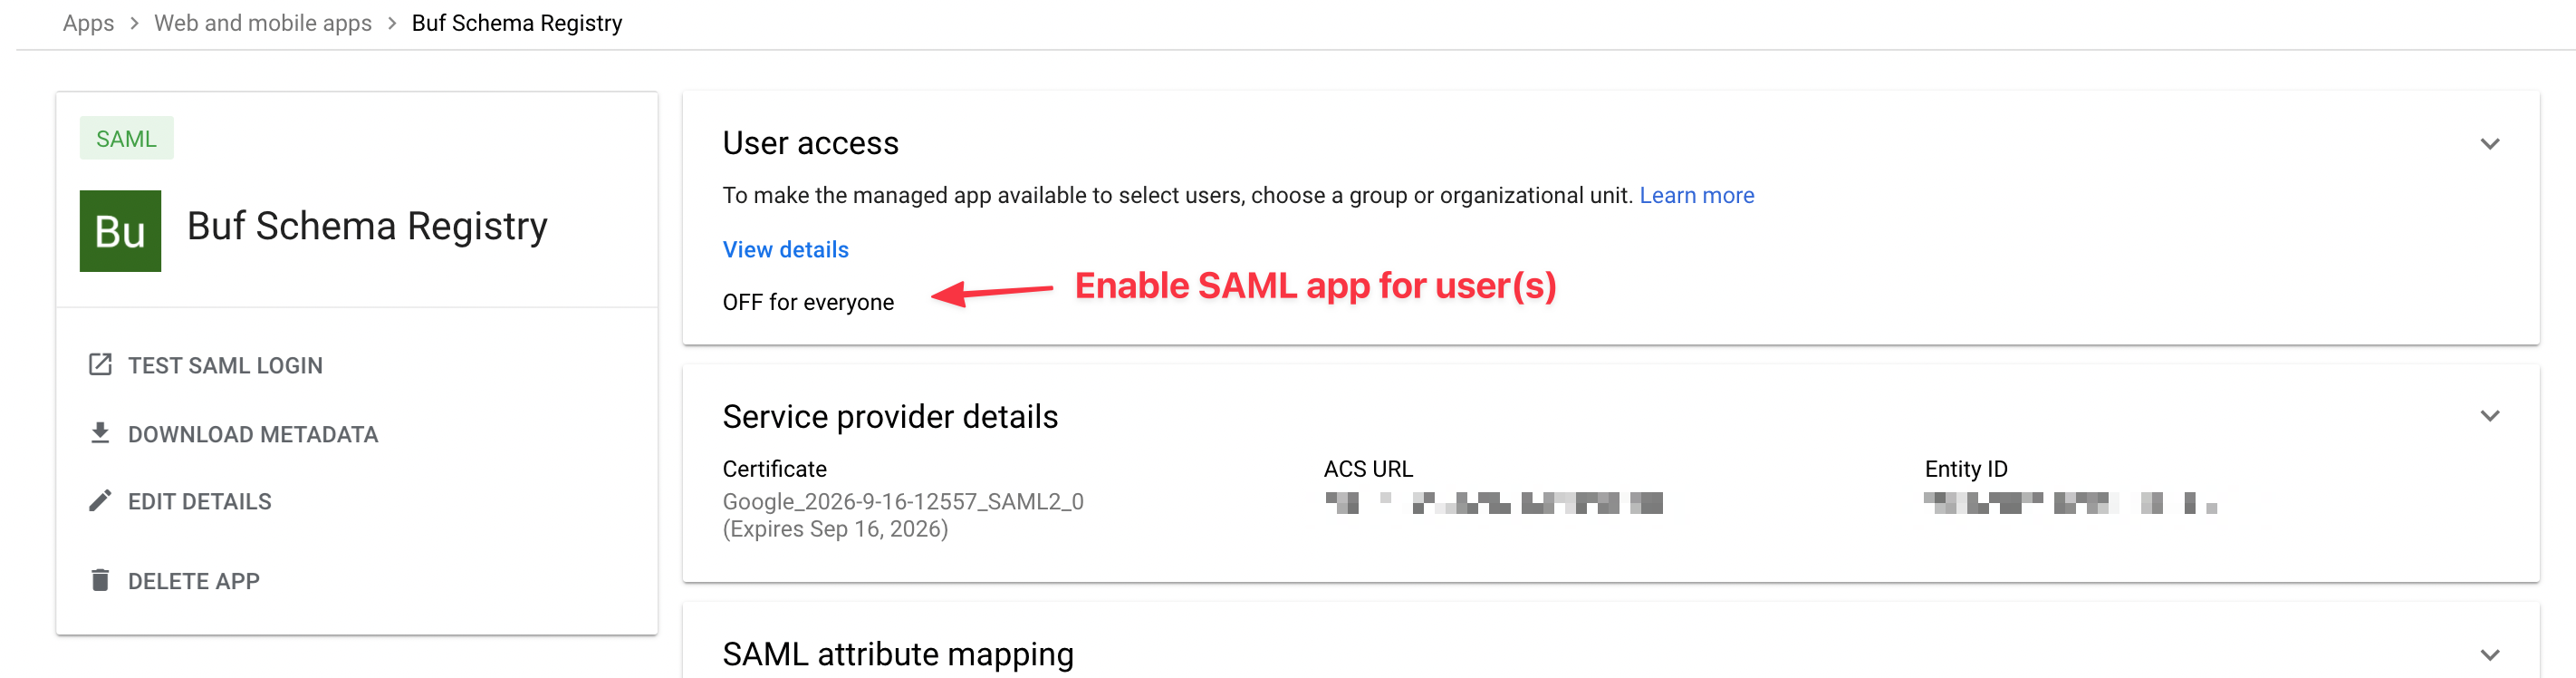 Google - Enable SAML for users